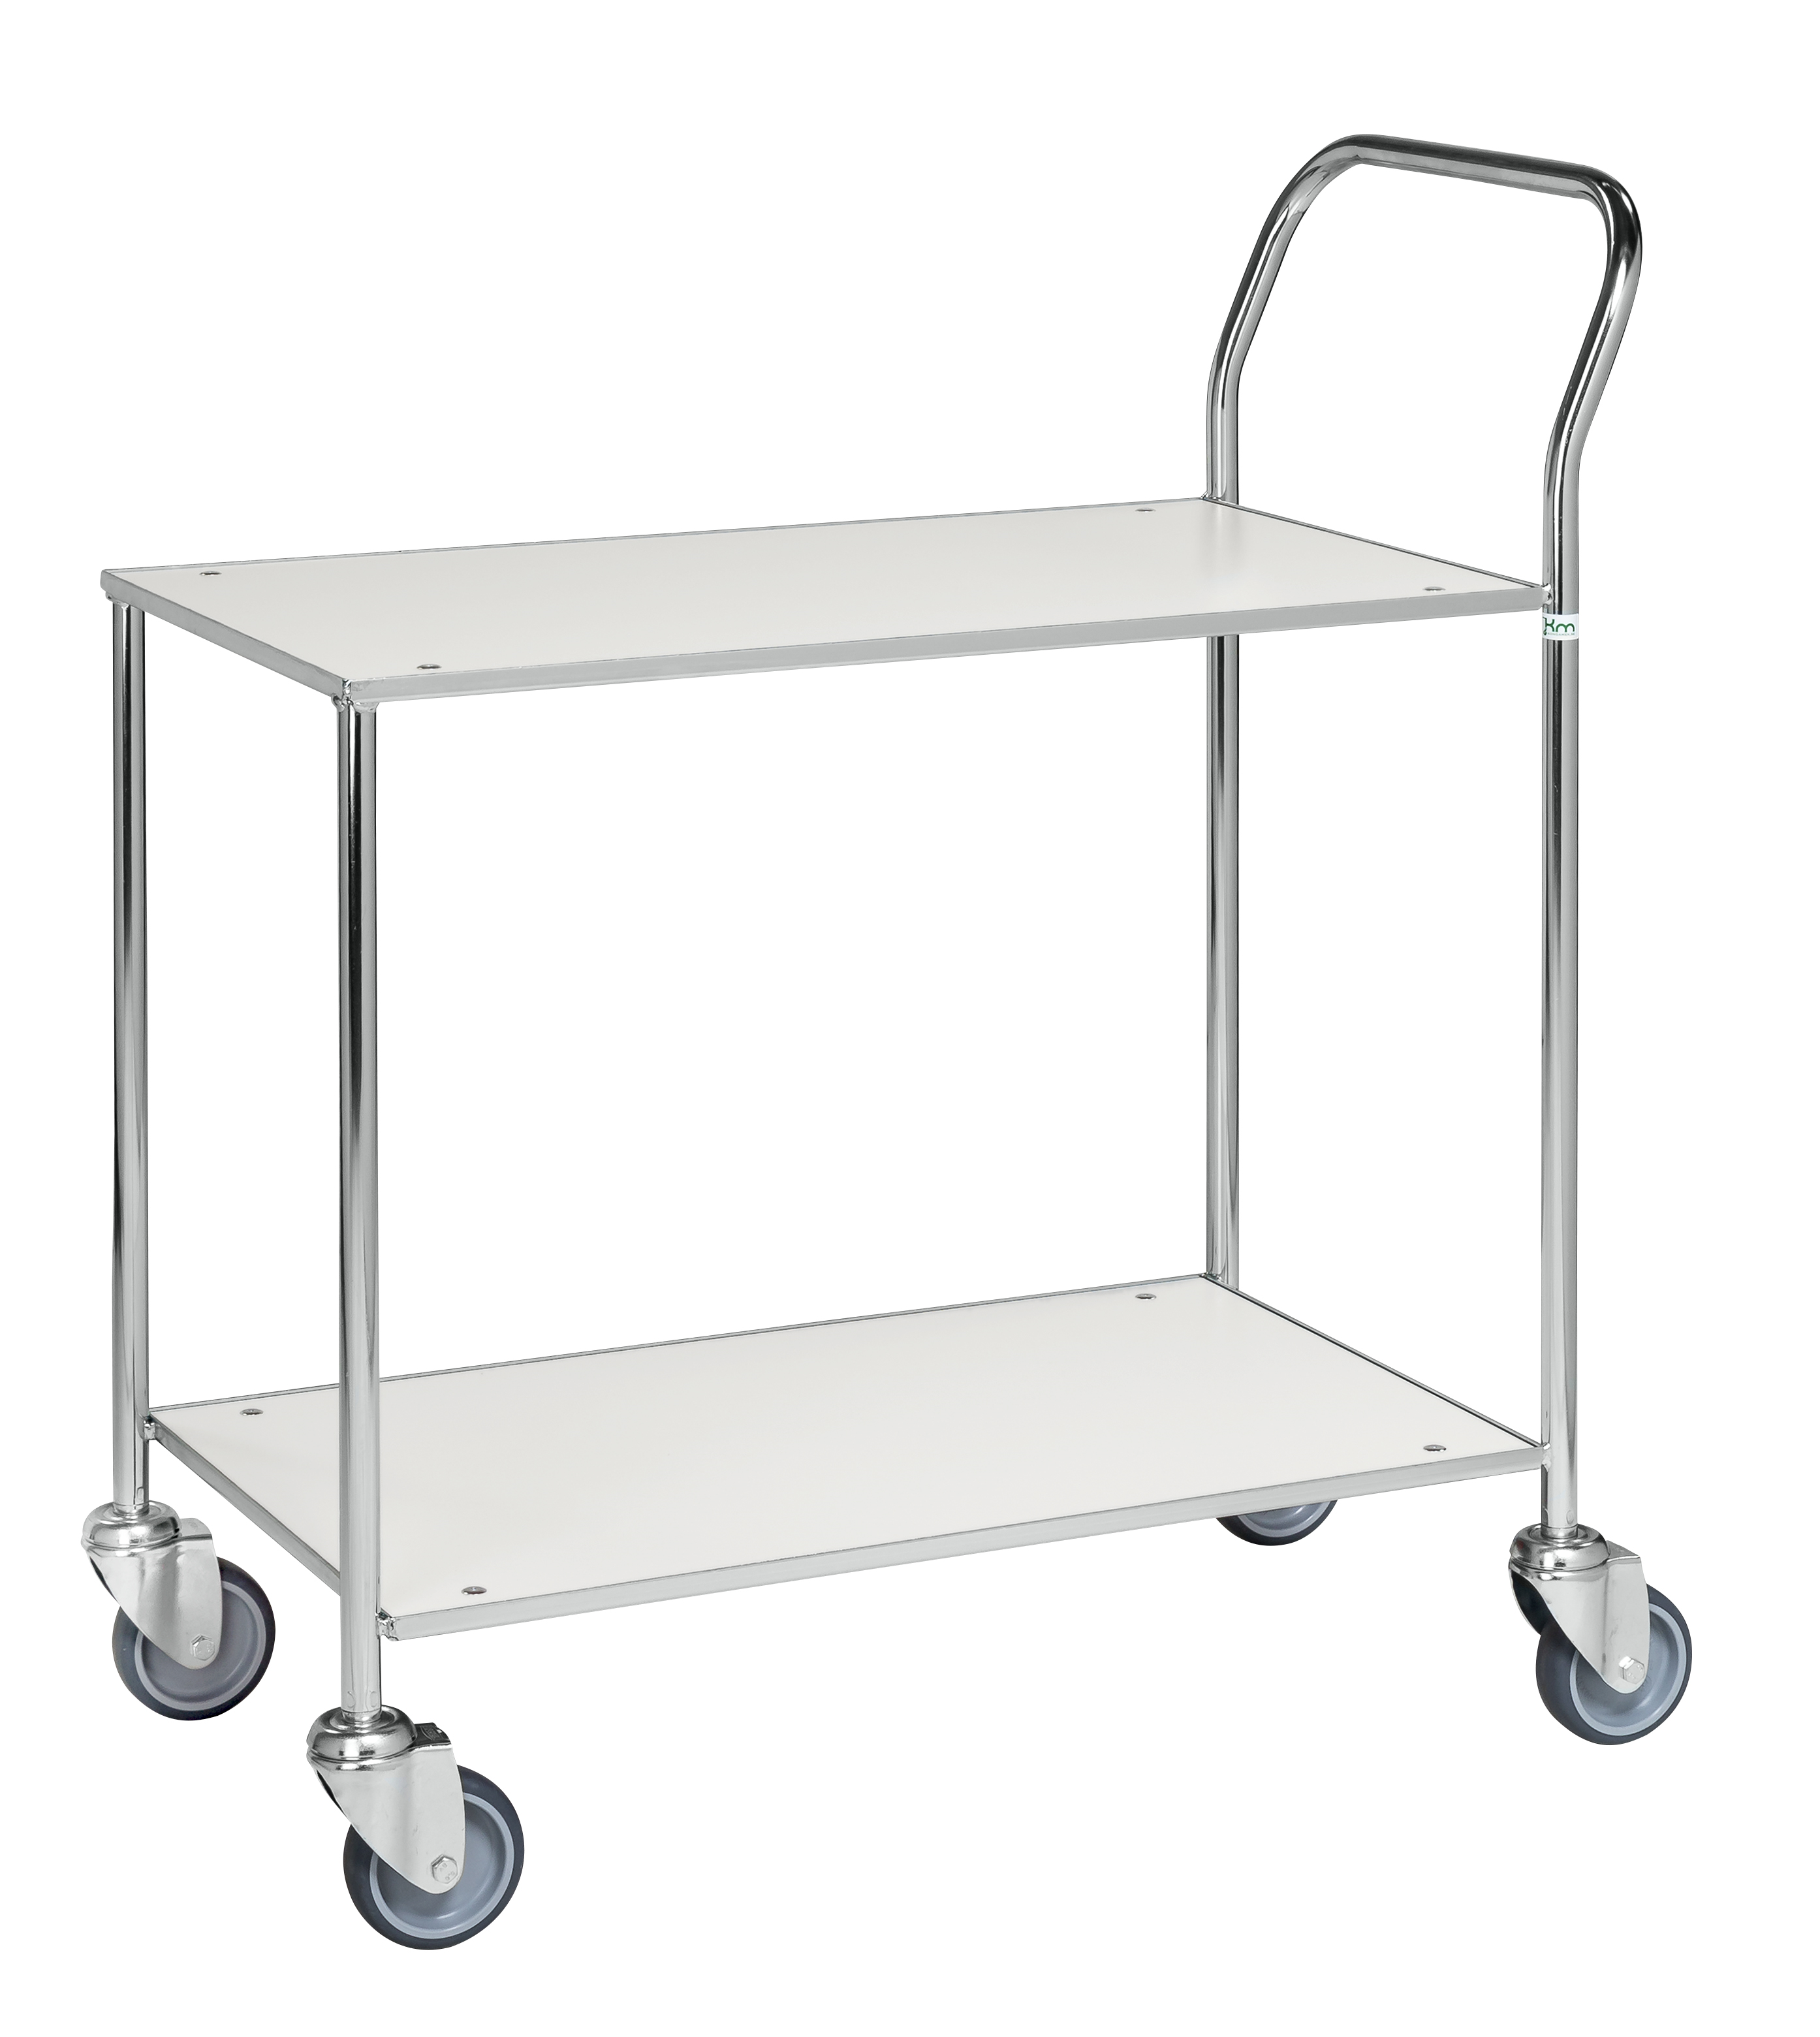 Small table trolley, fully welded KM172-6